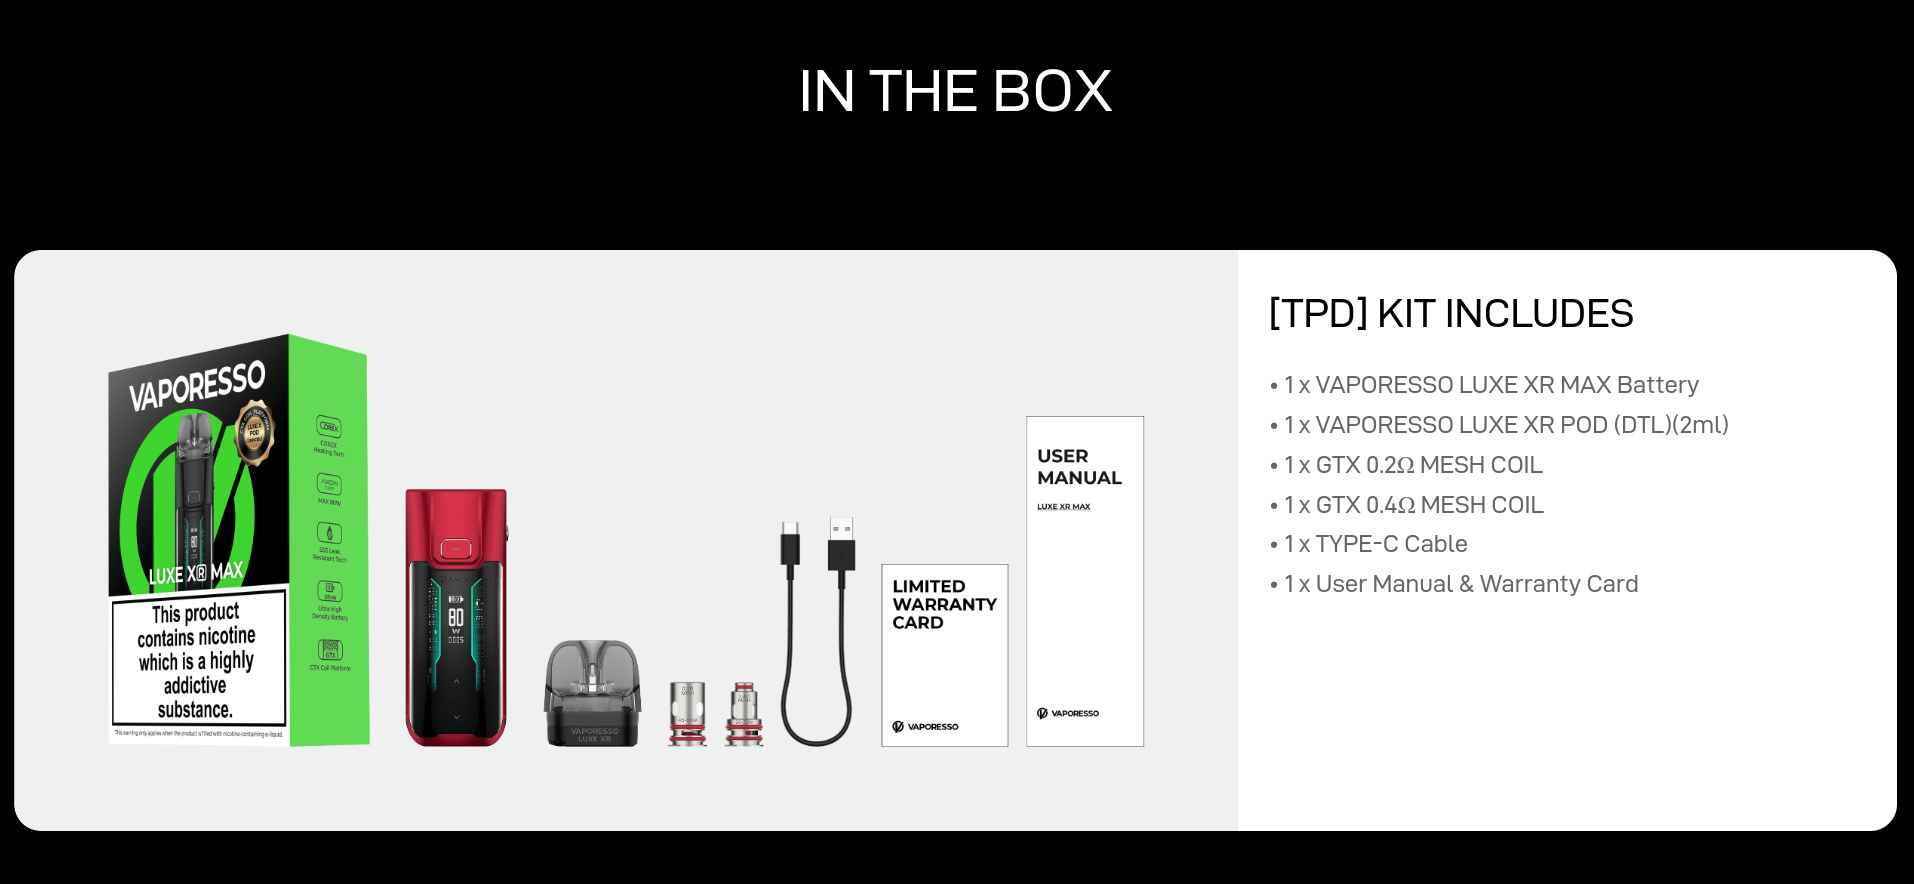 VAPORESSO LUXE XR POD includes